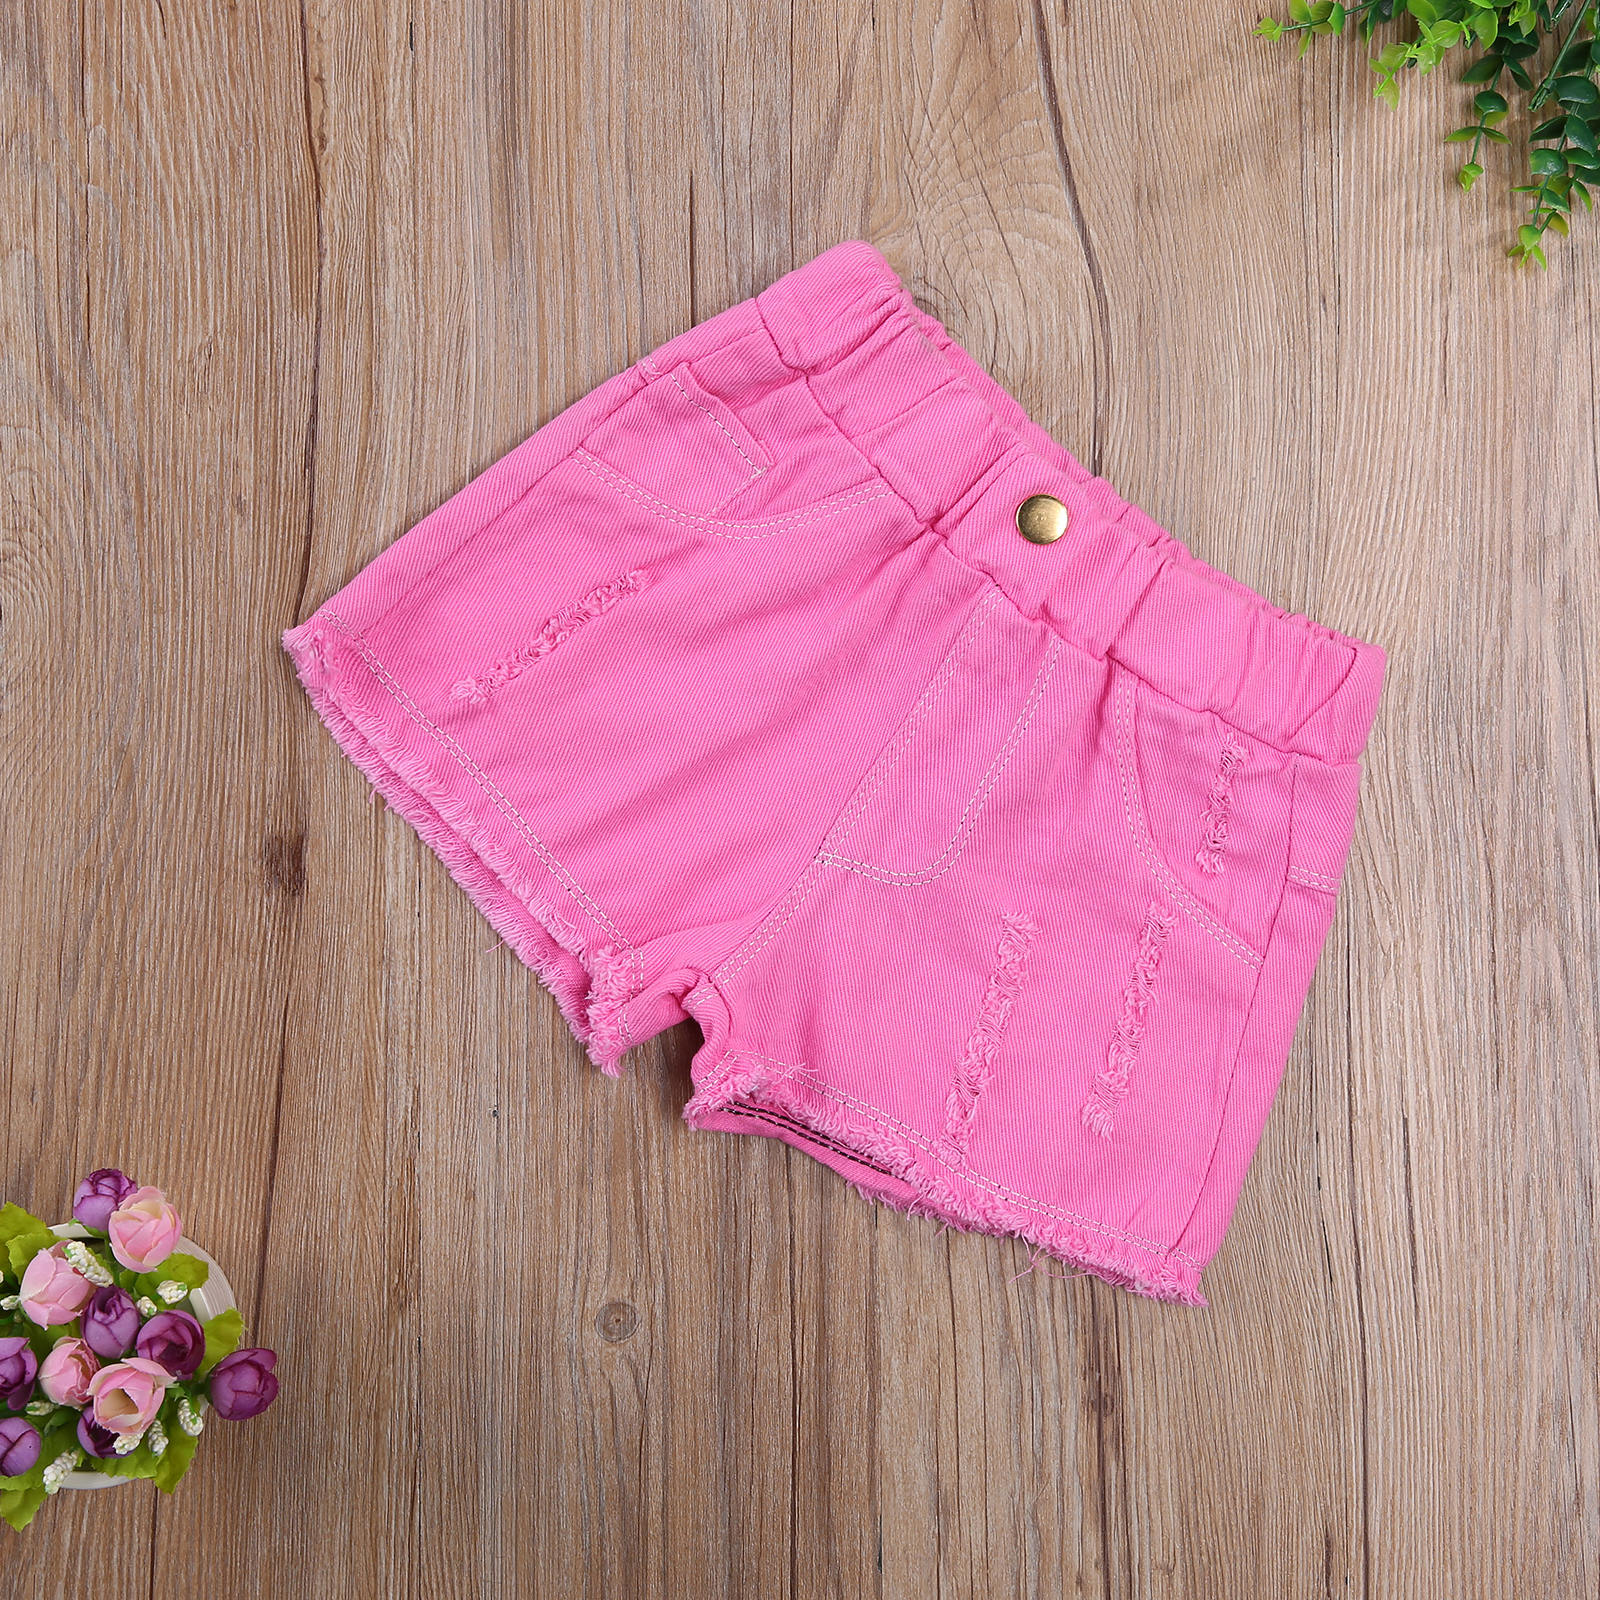 Eyicmarn Little Girls Ripped Denim Shorts, Solid Color High Elastic Waist Jeans Short Pants - image 3 of 6